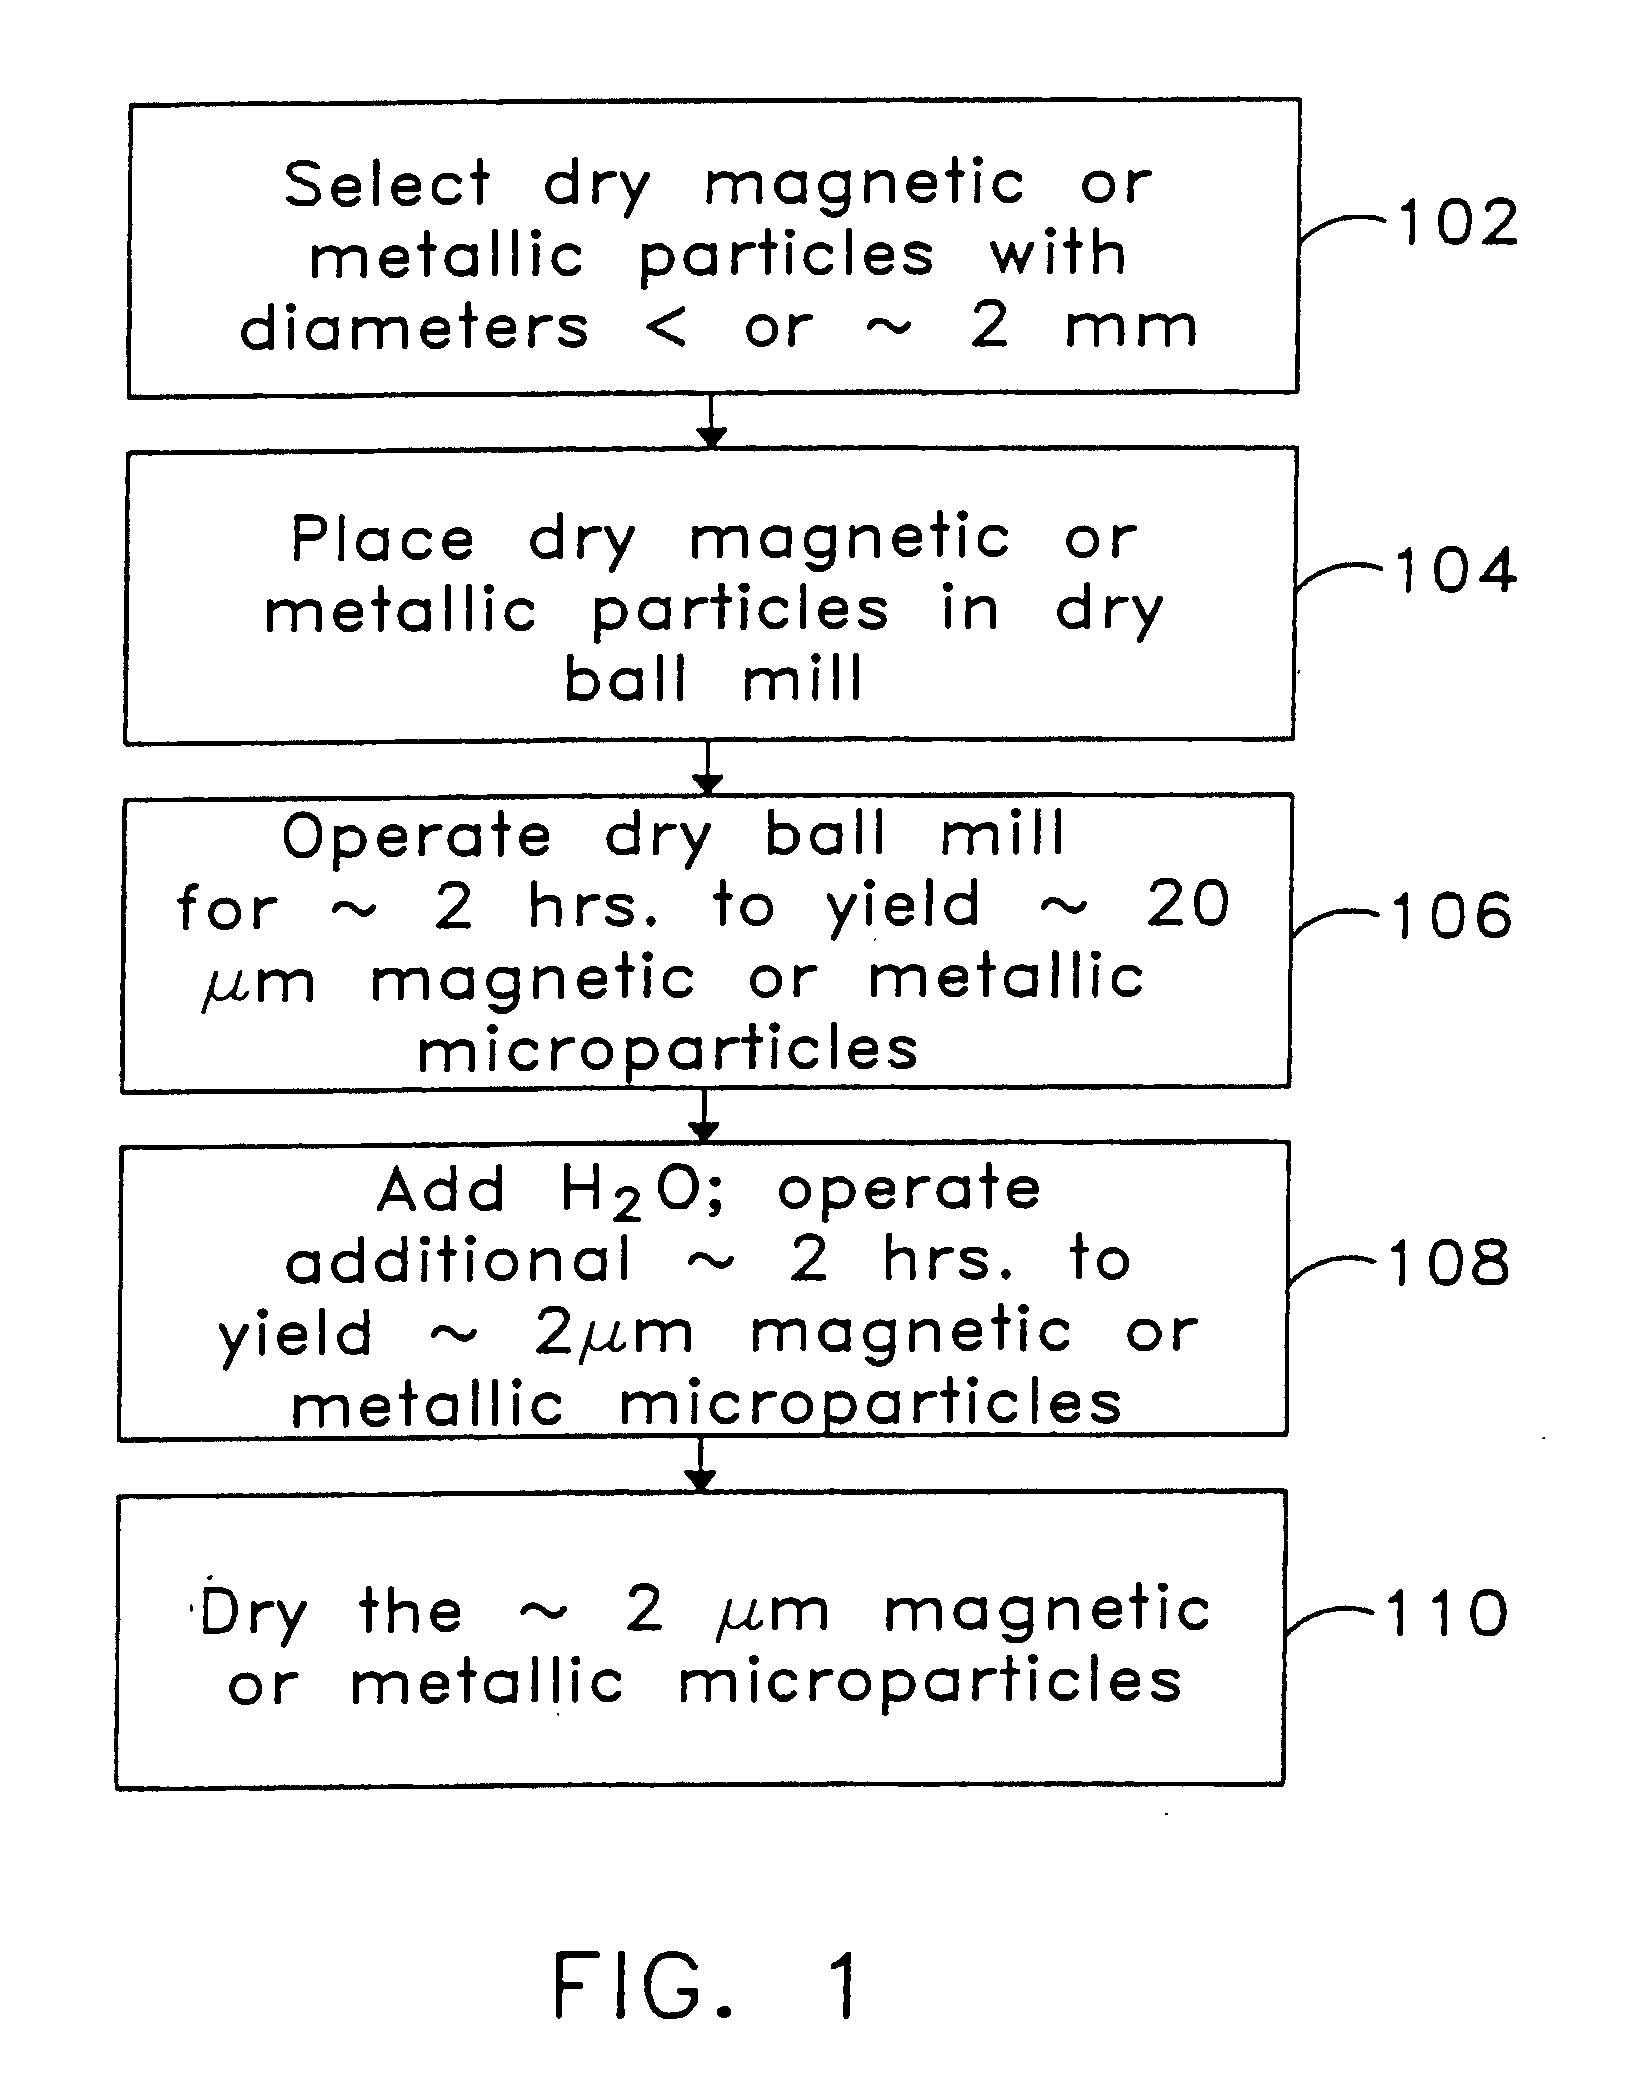 Magnet materials and metallic particles and methods of making same